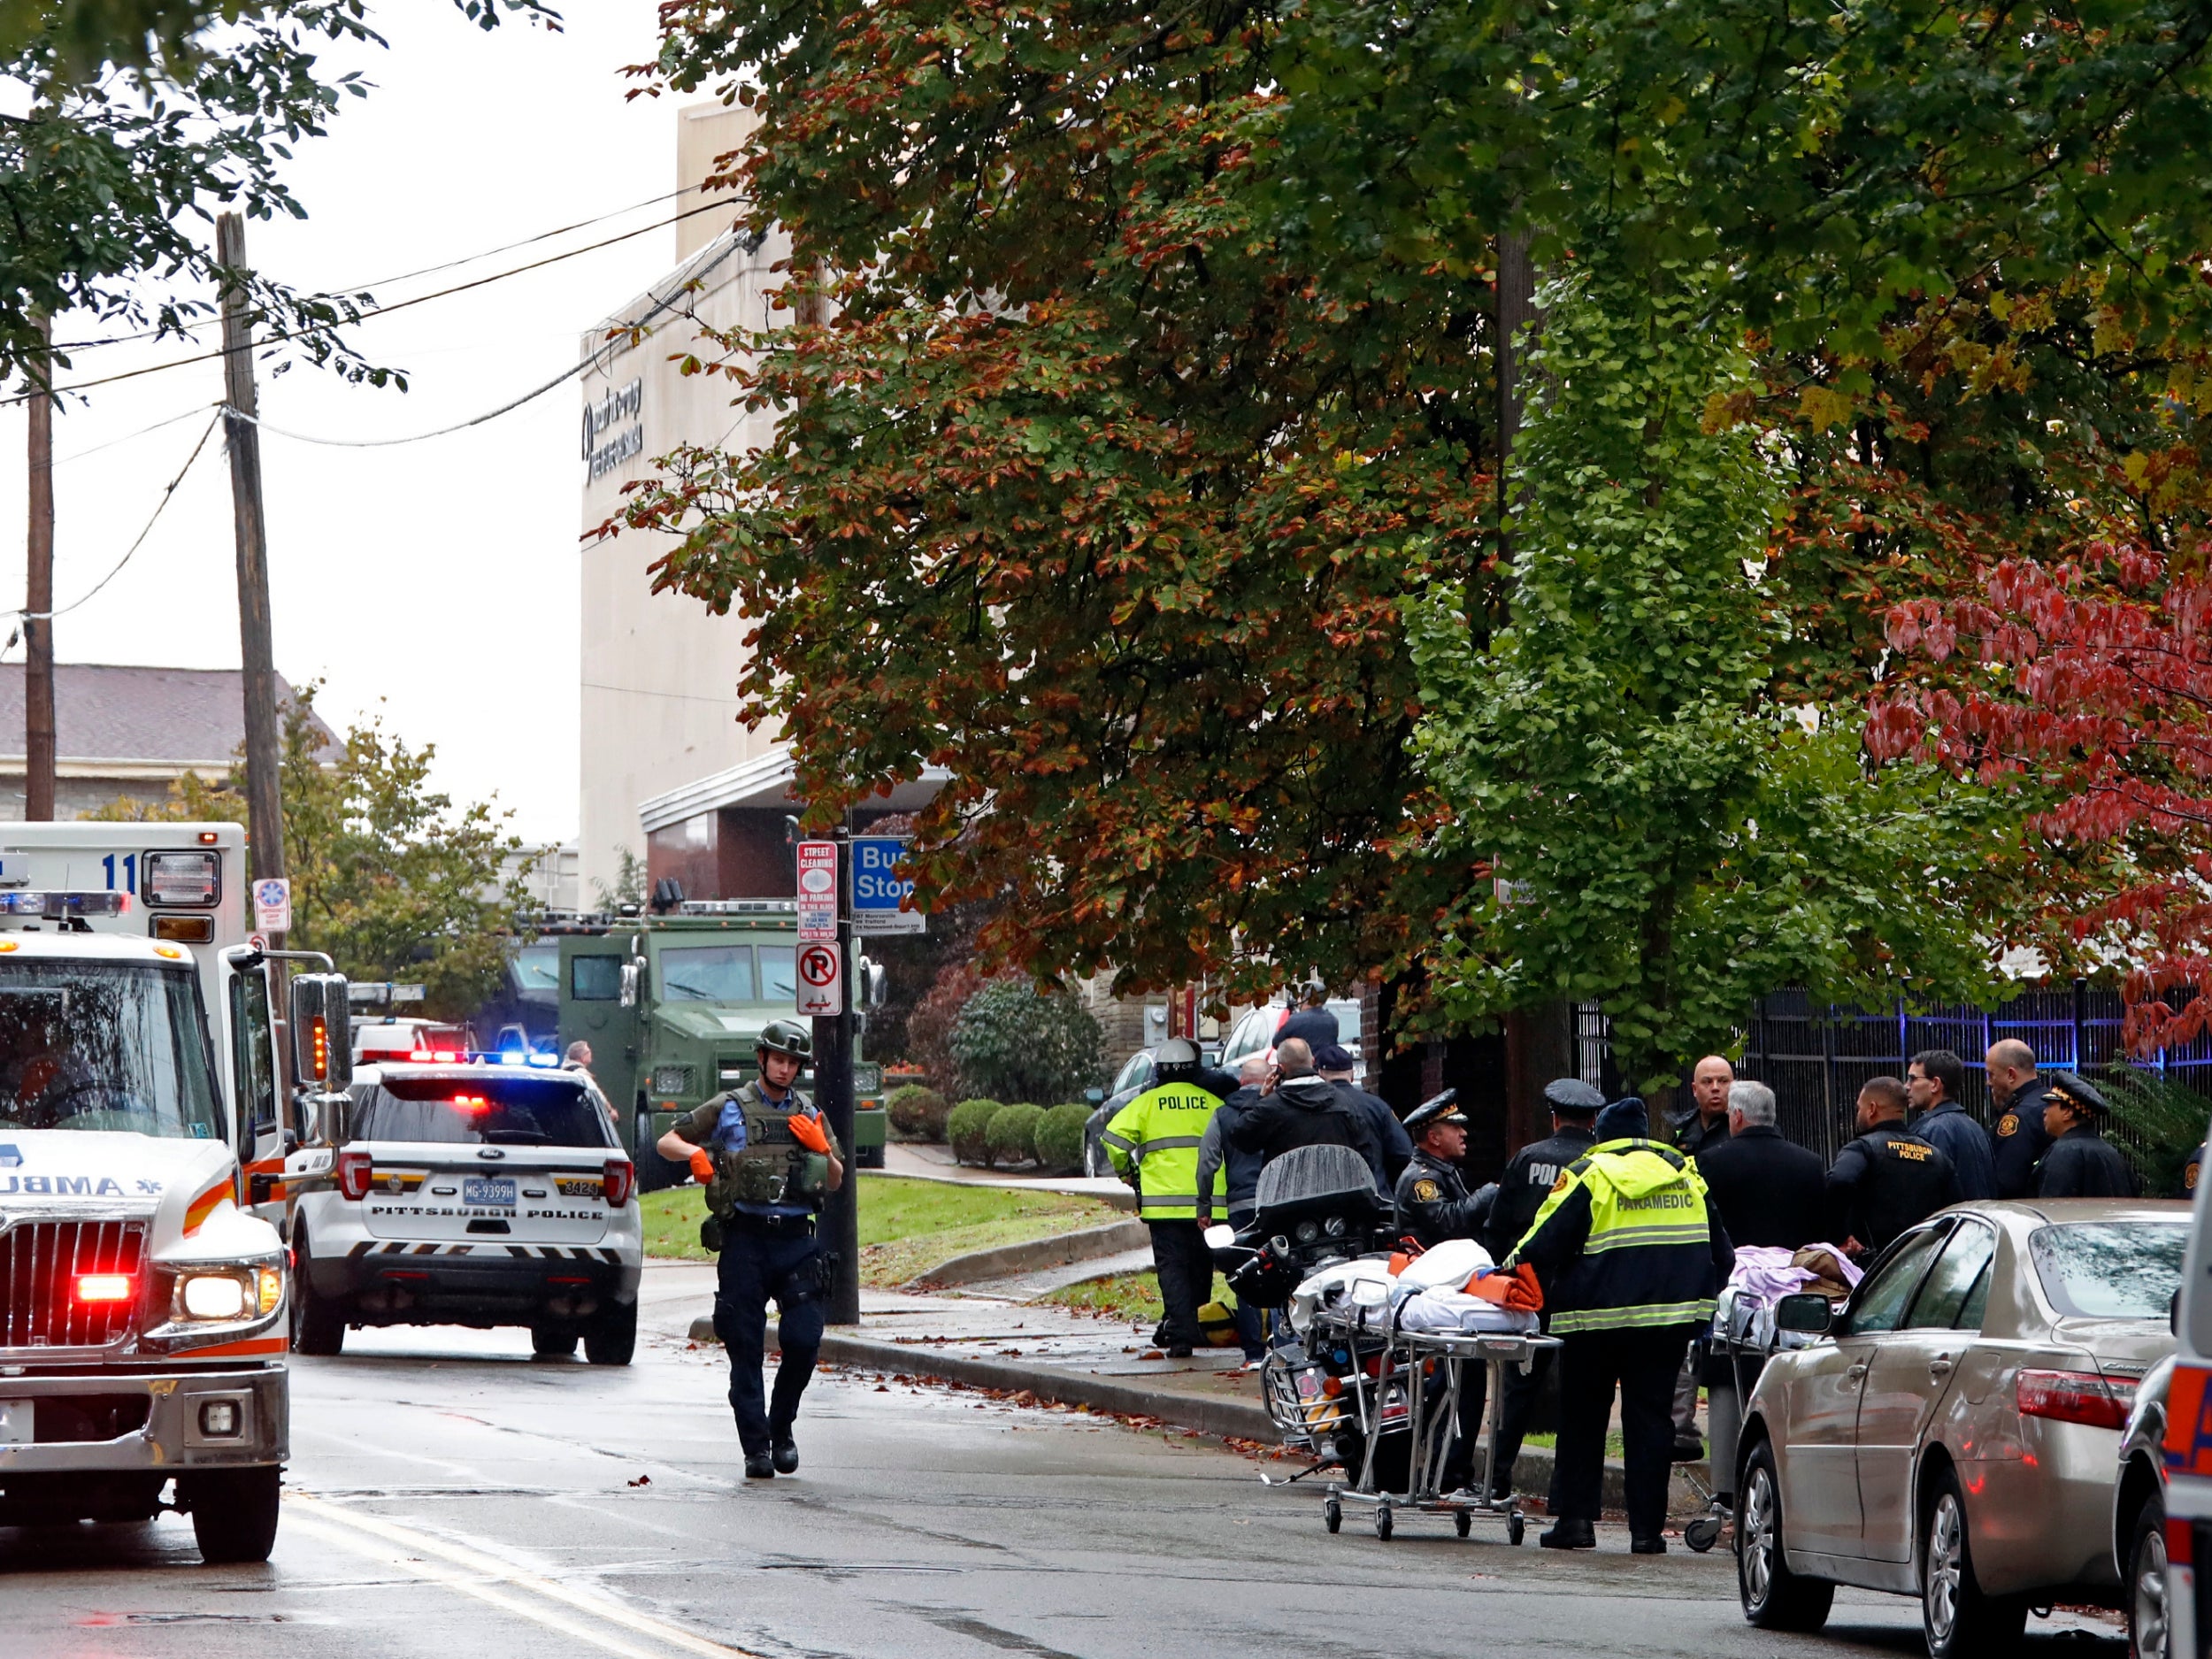 Emergency services surround the Tree of Life synagogue in Pittsburgh, where 11 people were killed in an antisemitic attack in October